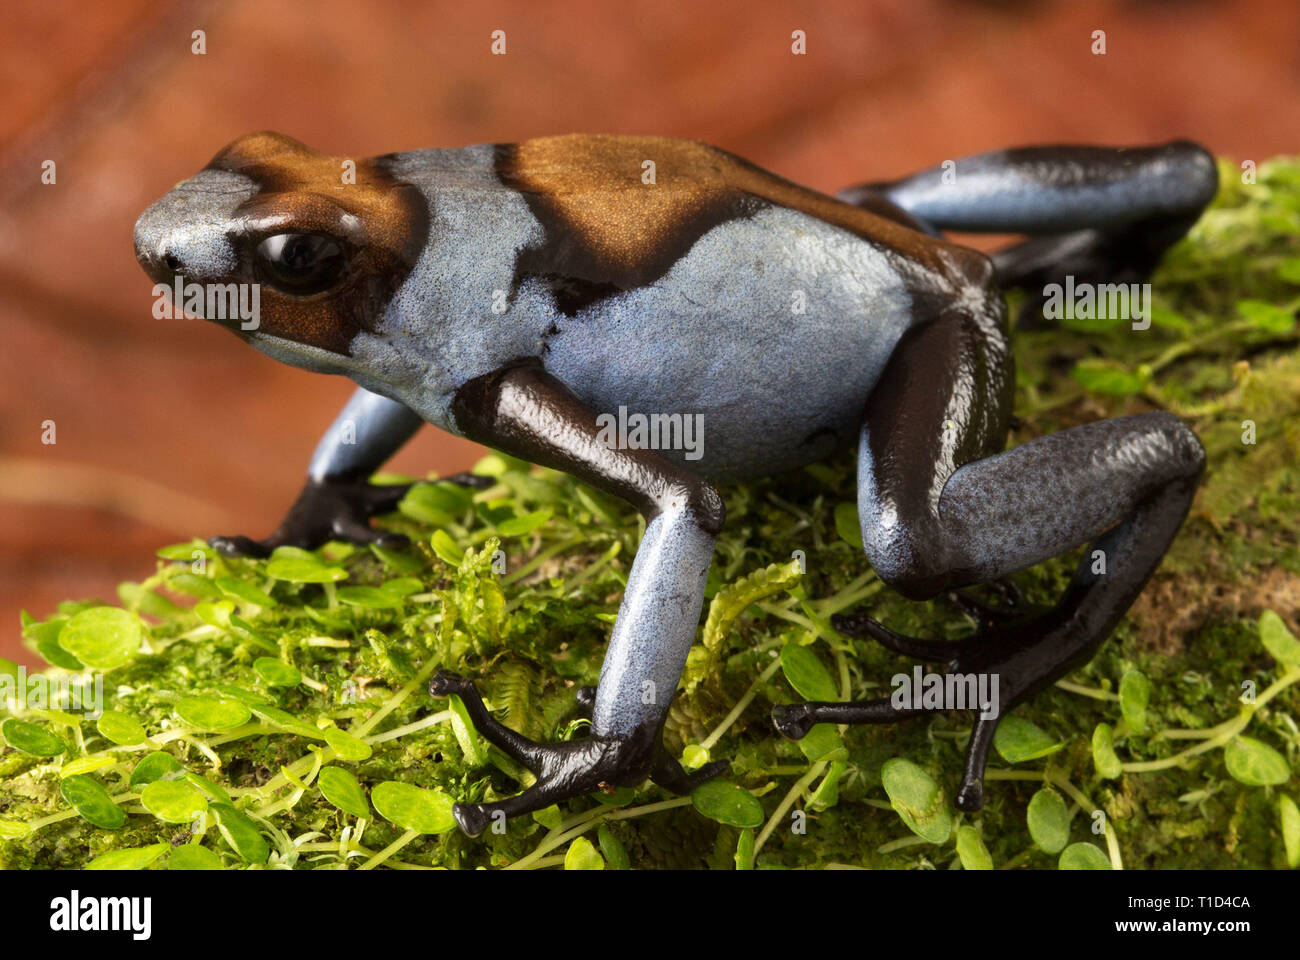 Blue Harlequin poison dart frog, Oophaga histrionica. A small tropical exotic poisonous dartfrog from the rain forest of Colombia. Stock Photo